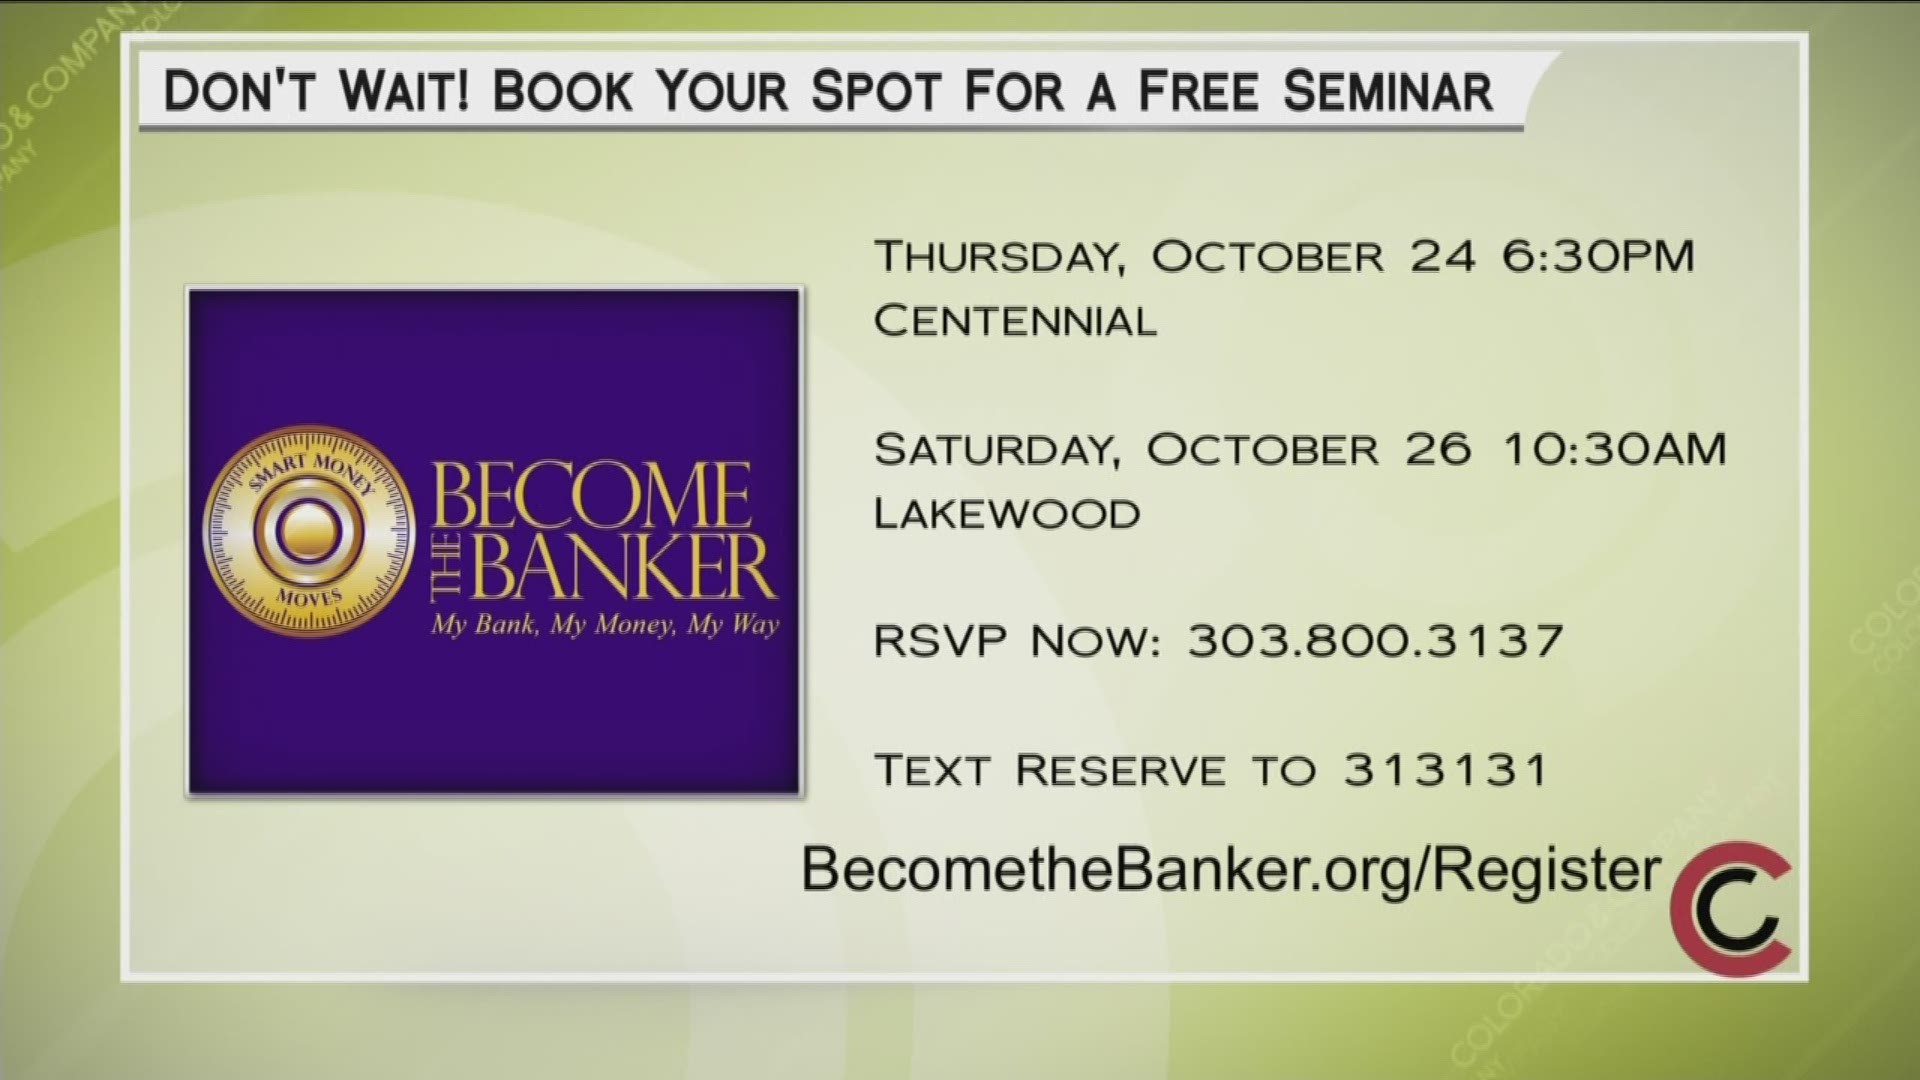 Attend an upcoming free financial seminar. Call 303-800-3137 to reserve your place today. Or text the word "reserve" to "313131." Don't miss this opportunity.